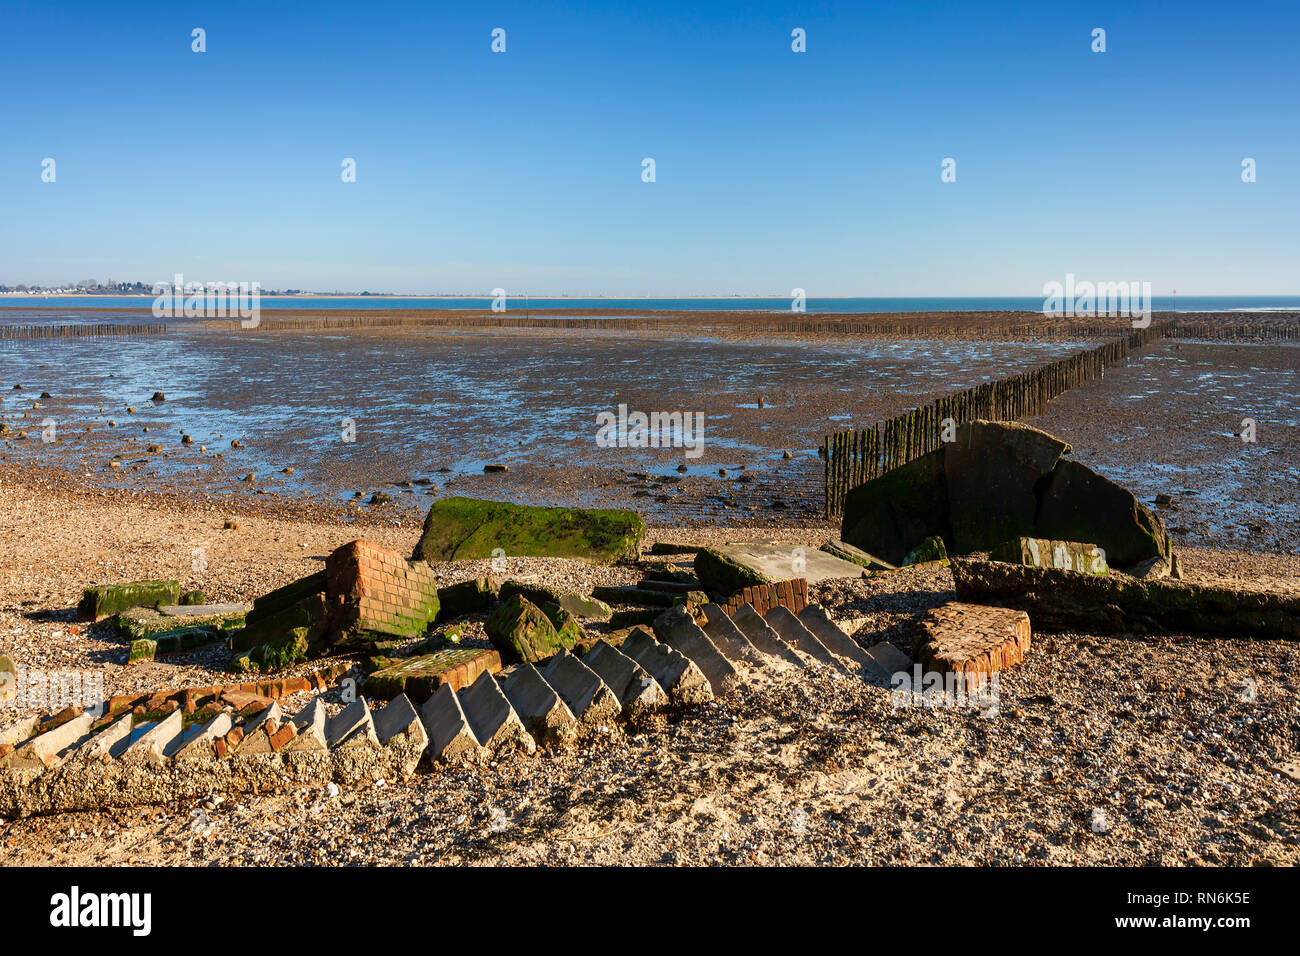 World War Two Pillbox or gun emplacement, fallen into the sea due to coastal erosion. Cudmore Grove Country Park, East Mersea, Essex. Stock Photo